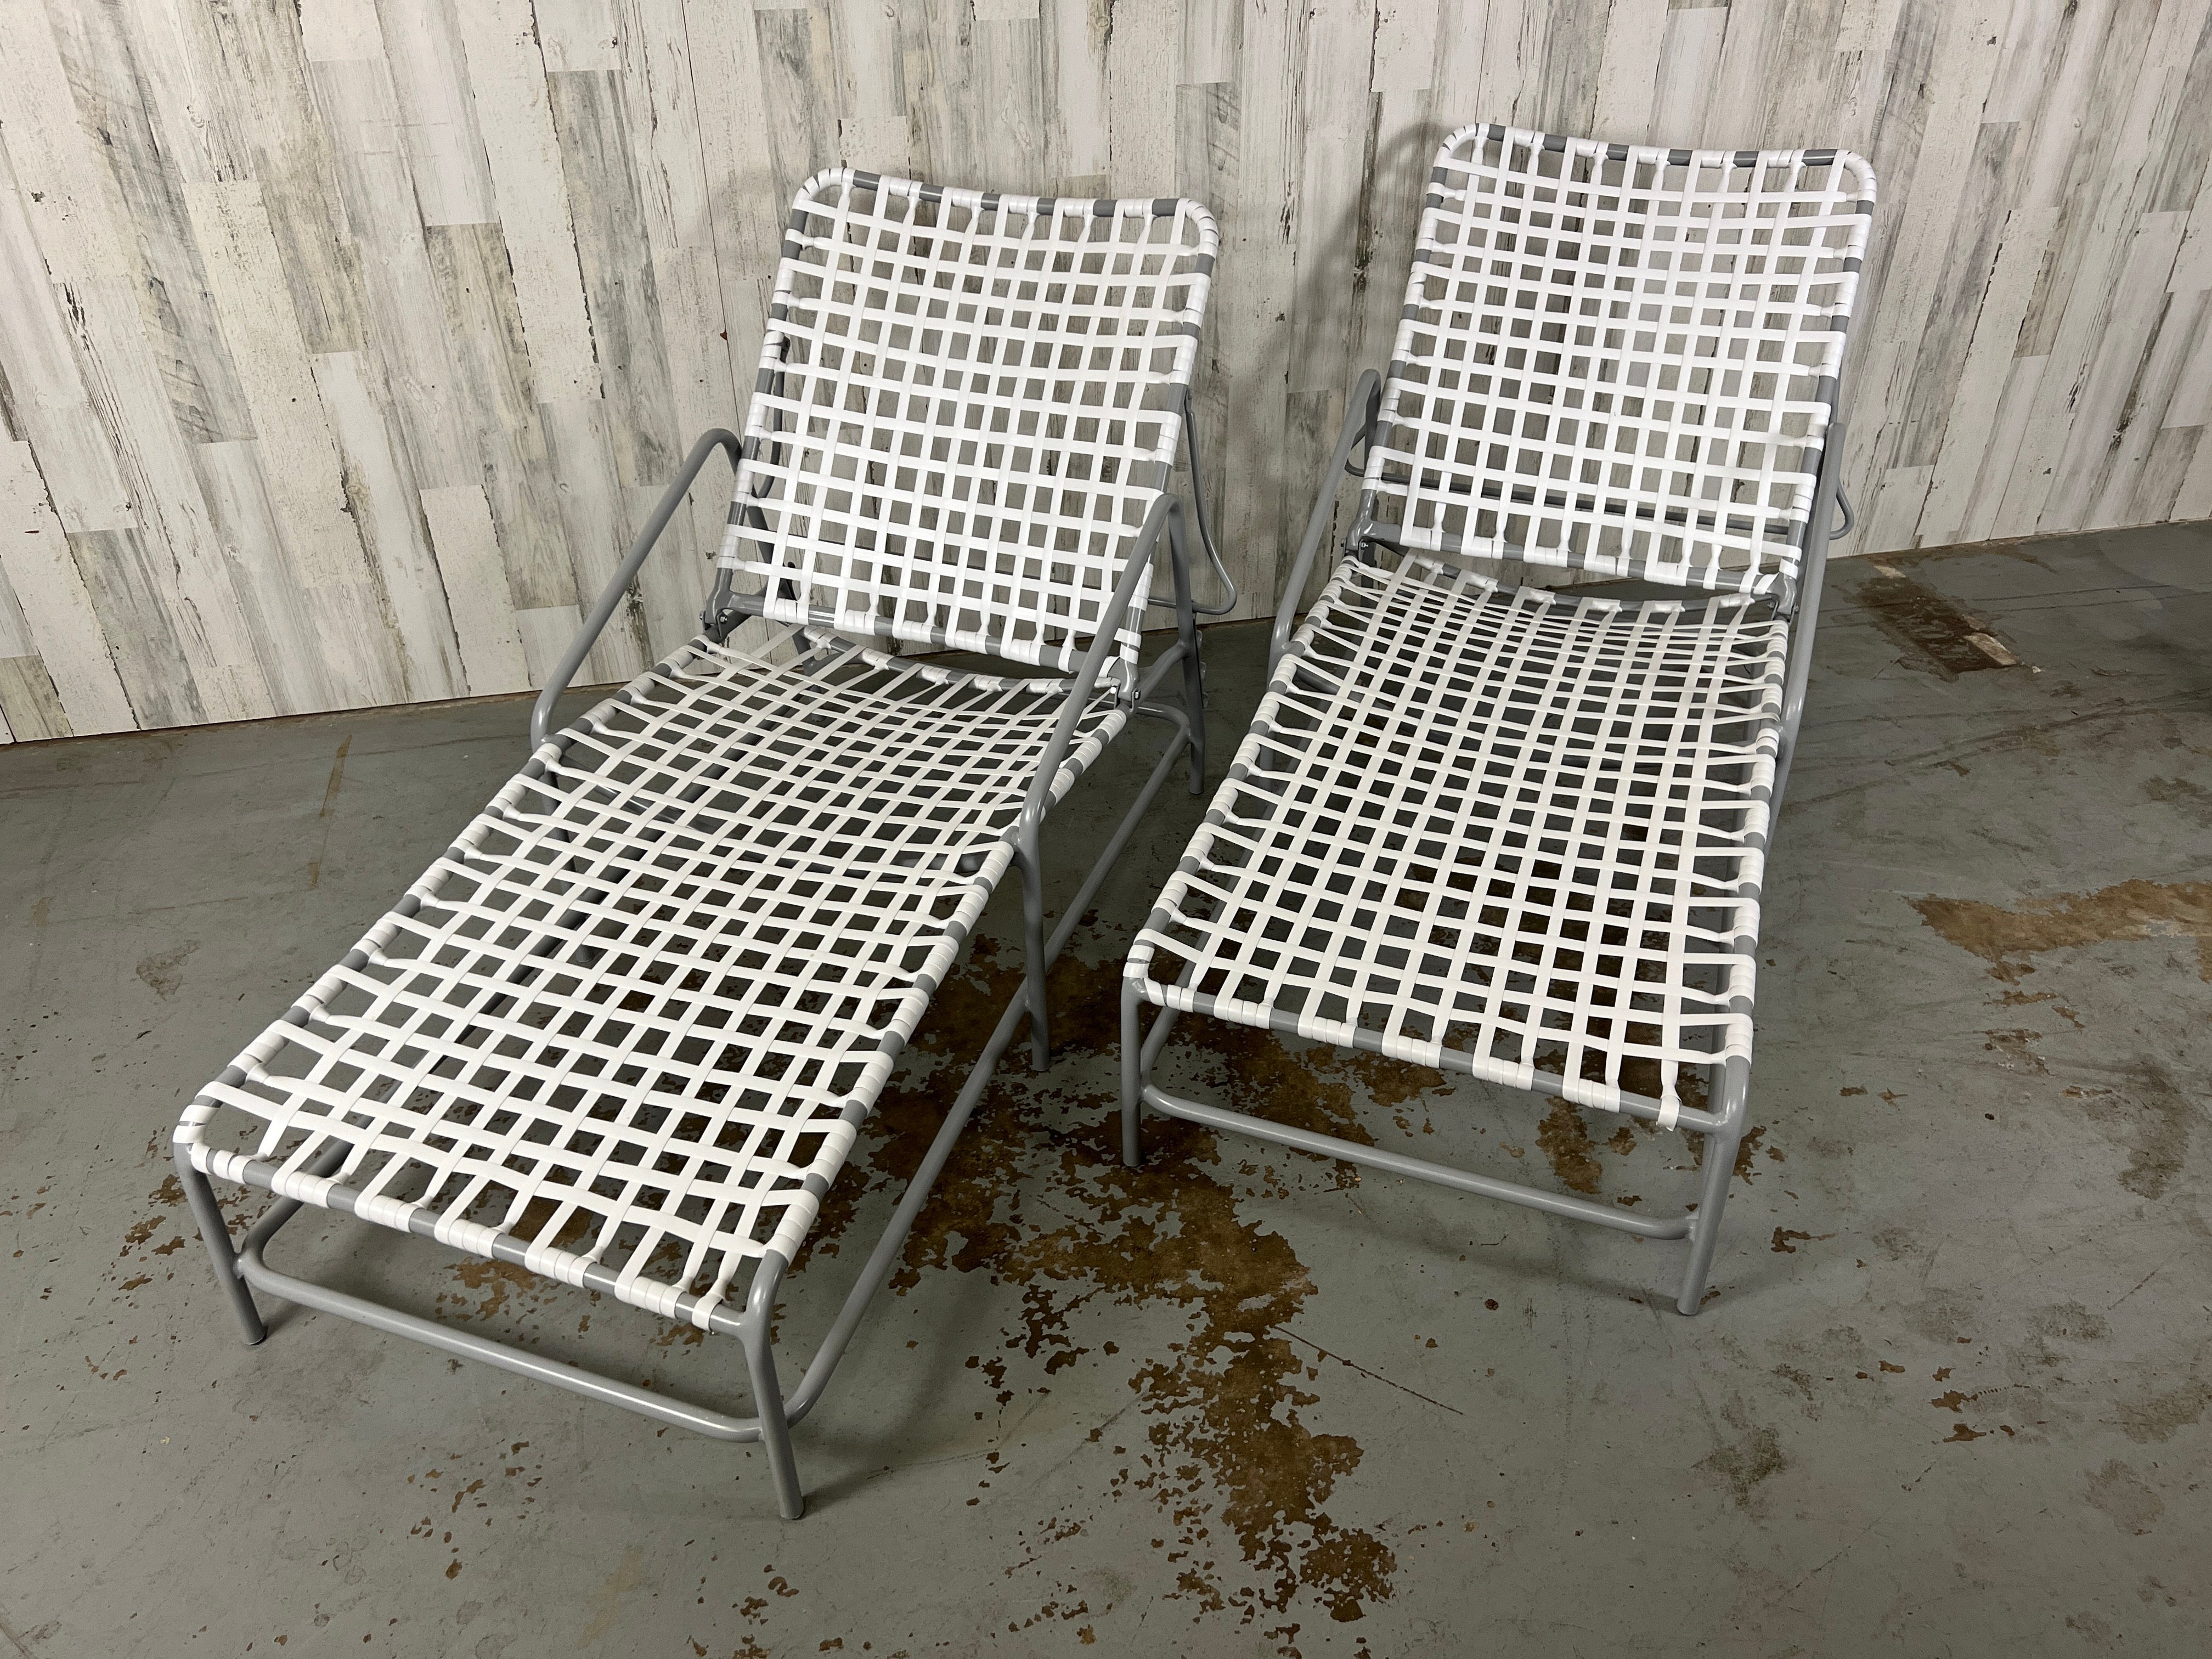 Designed by Tadao Inouye, Kantan Aluminum exemplifies the breezy spirit of patio life.  The frame is newly powder coated in Gray with new white lacing.                                                                                                  